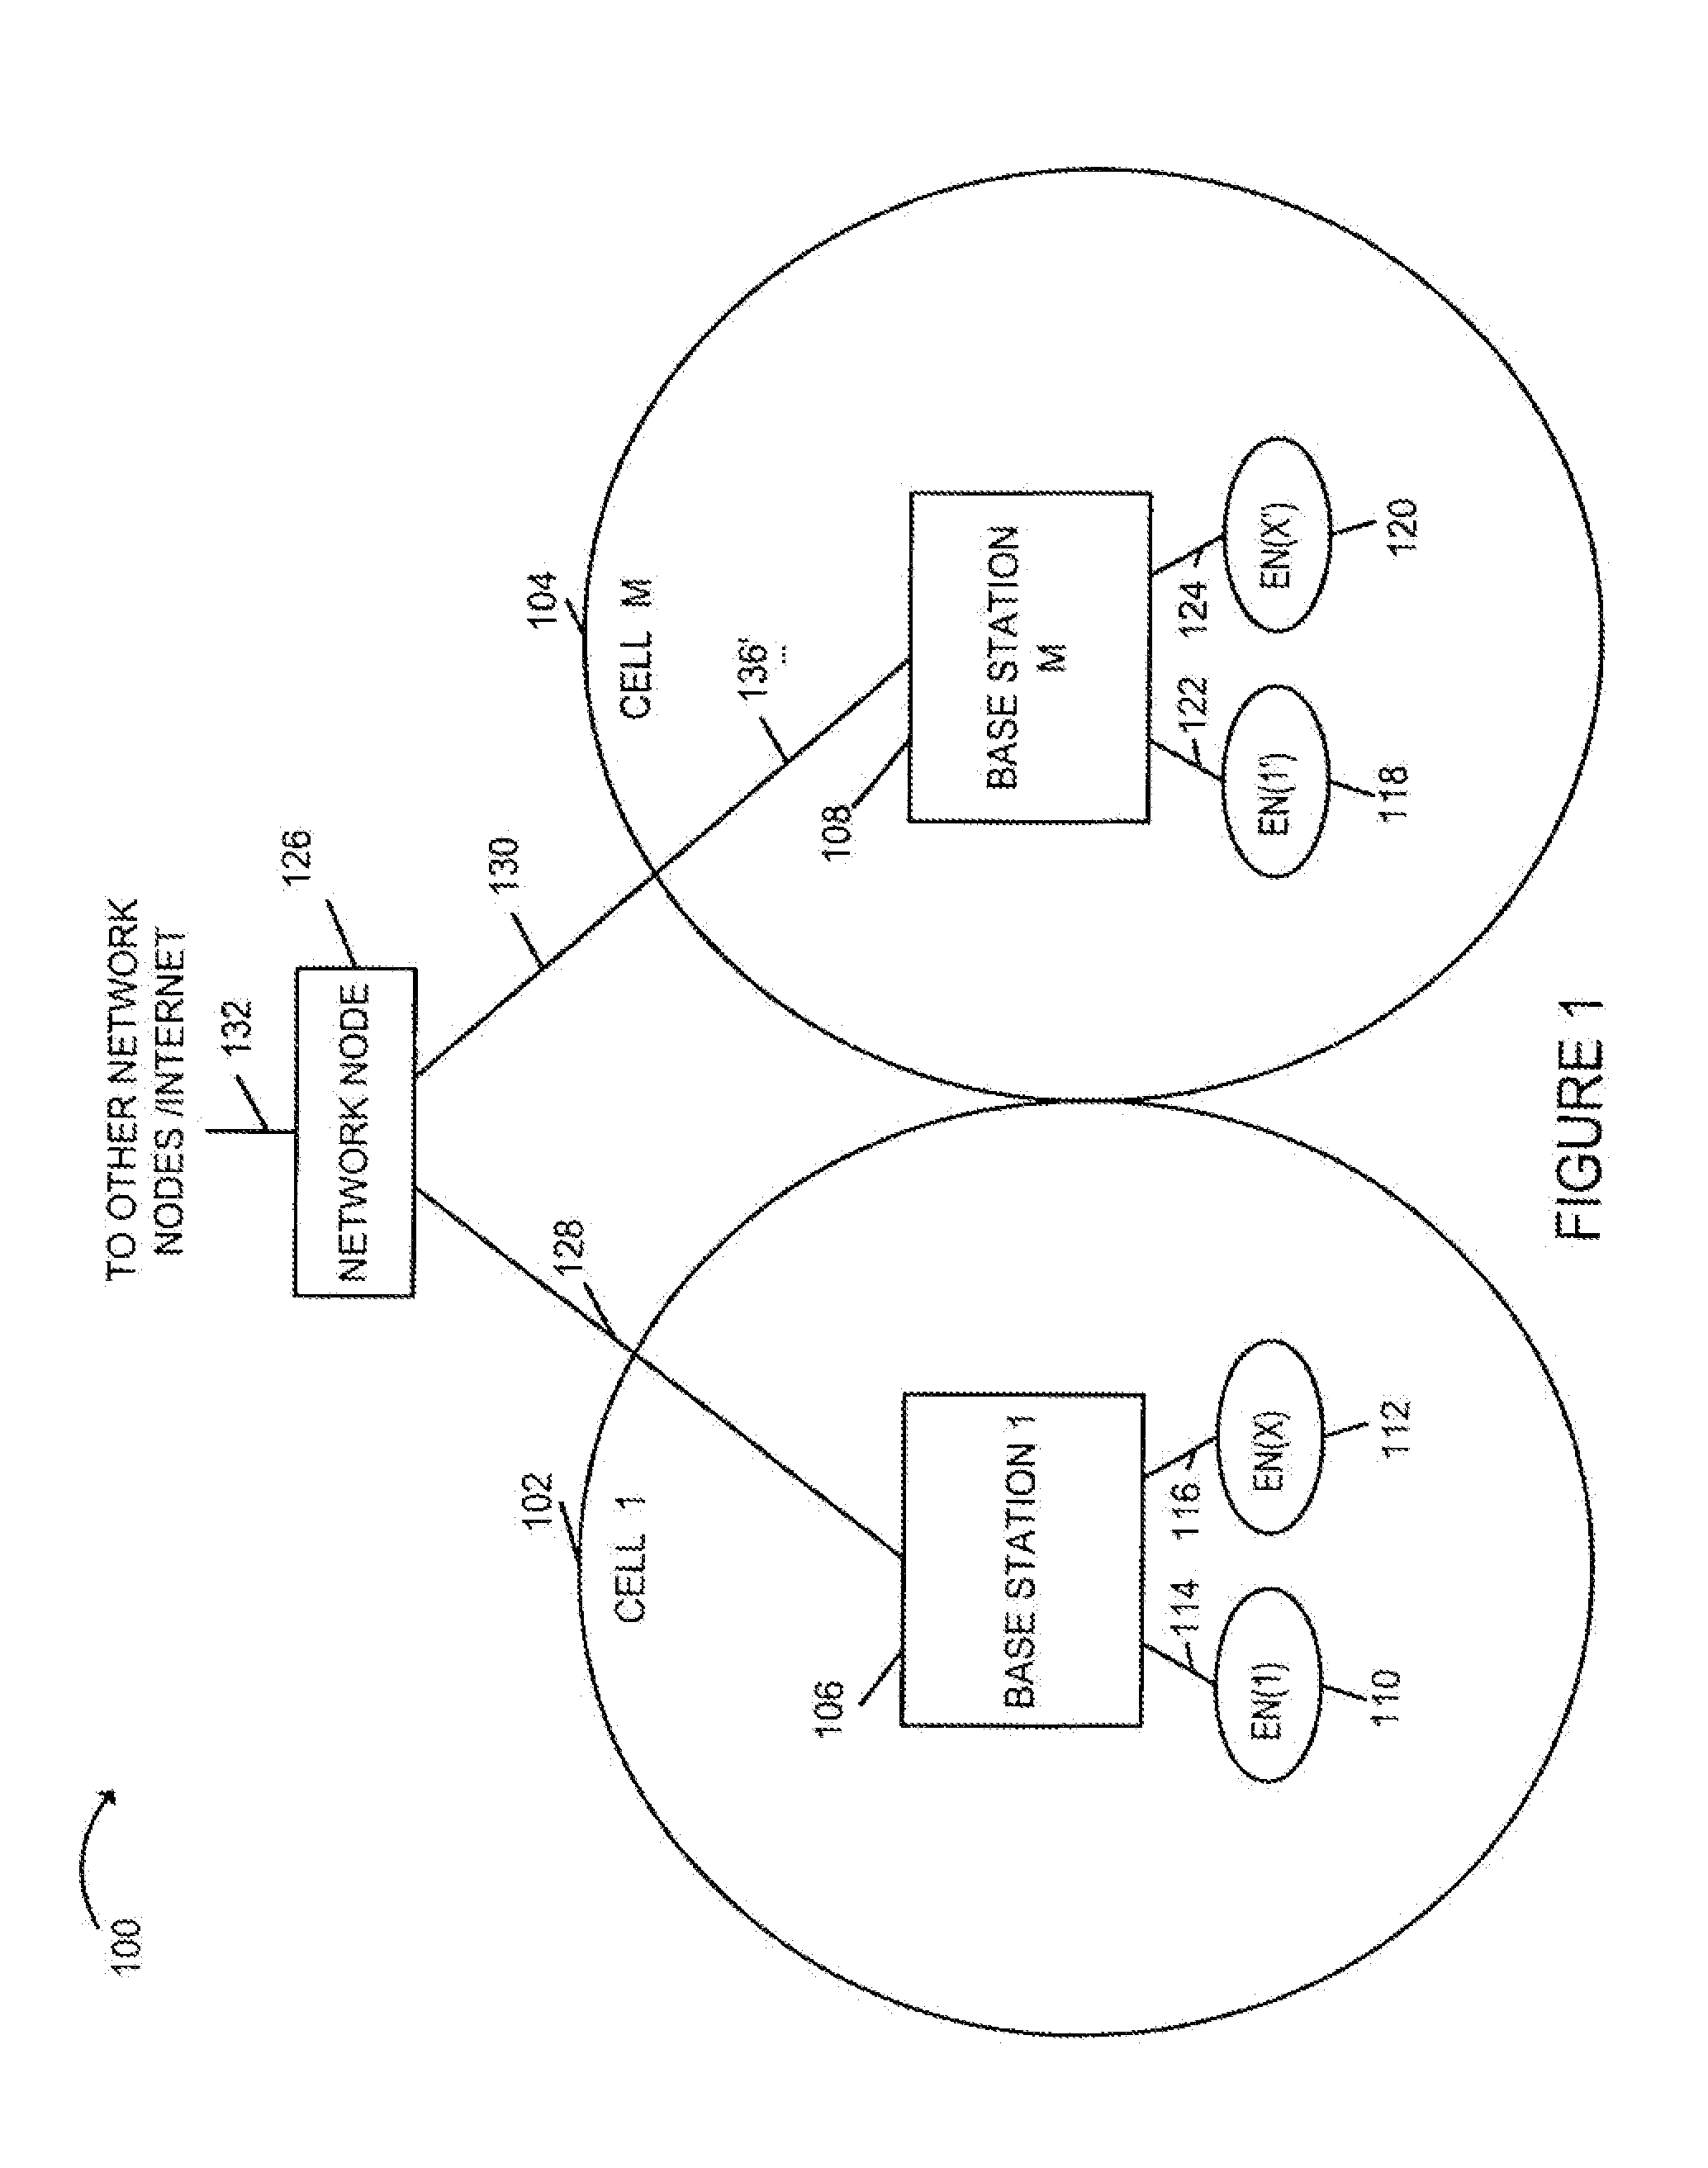 Efficient paging in a wireless communication system